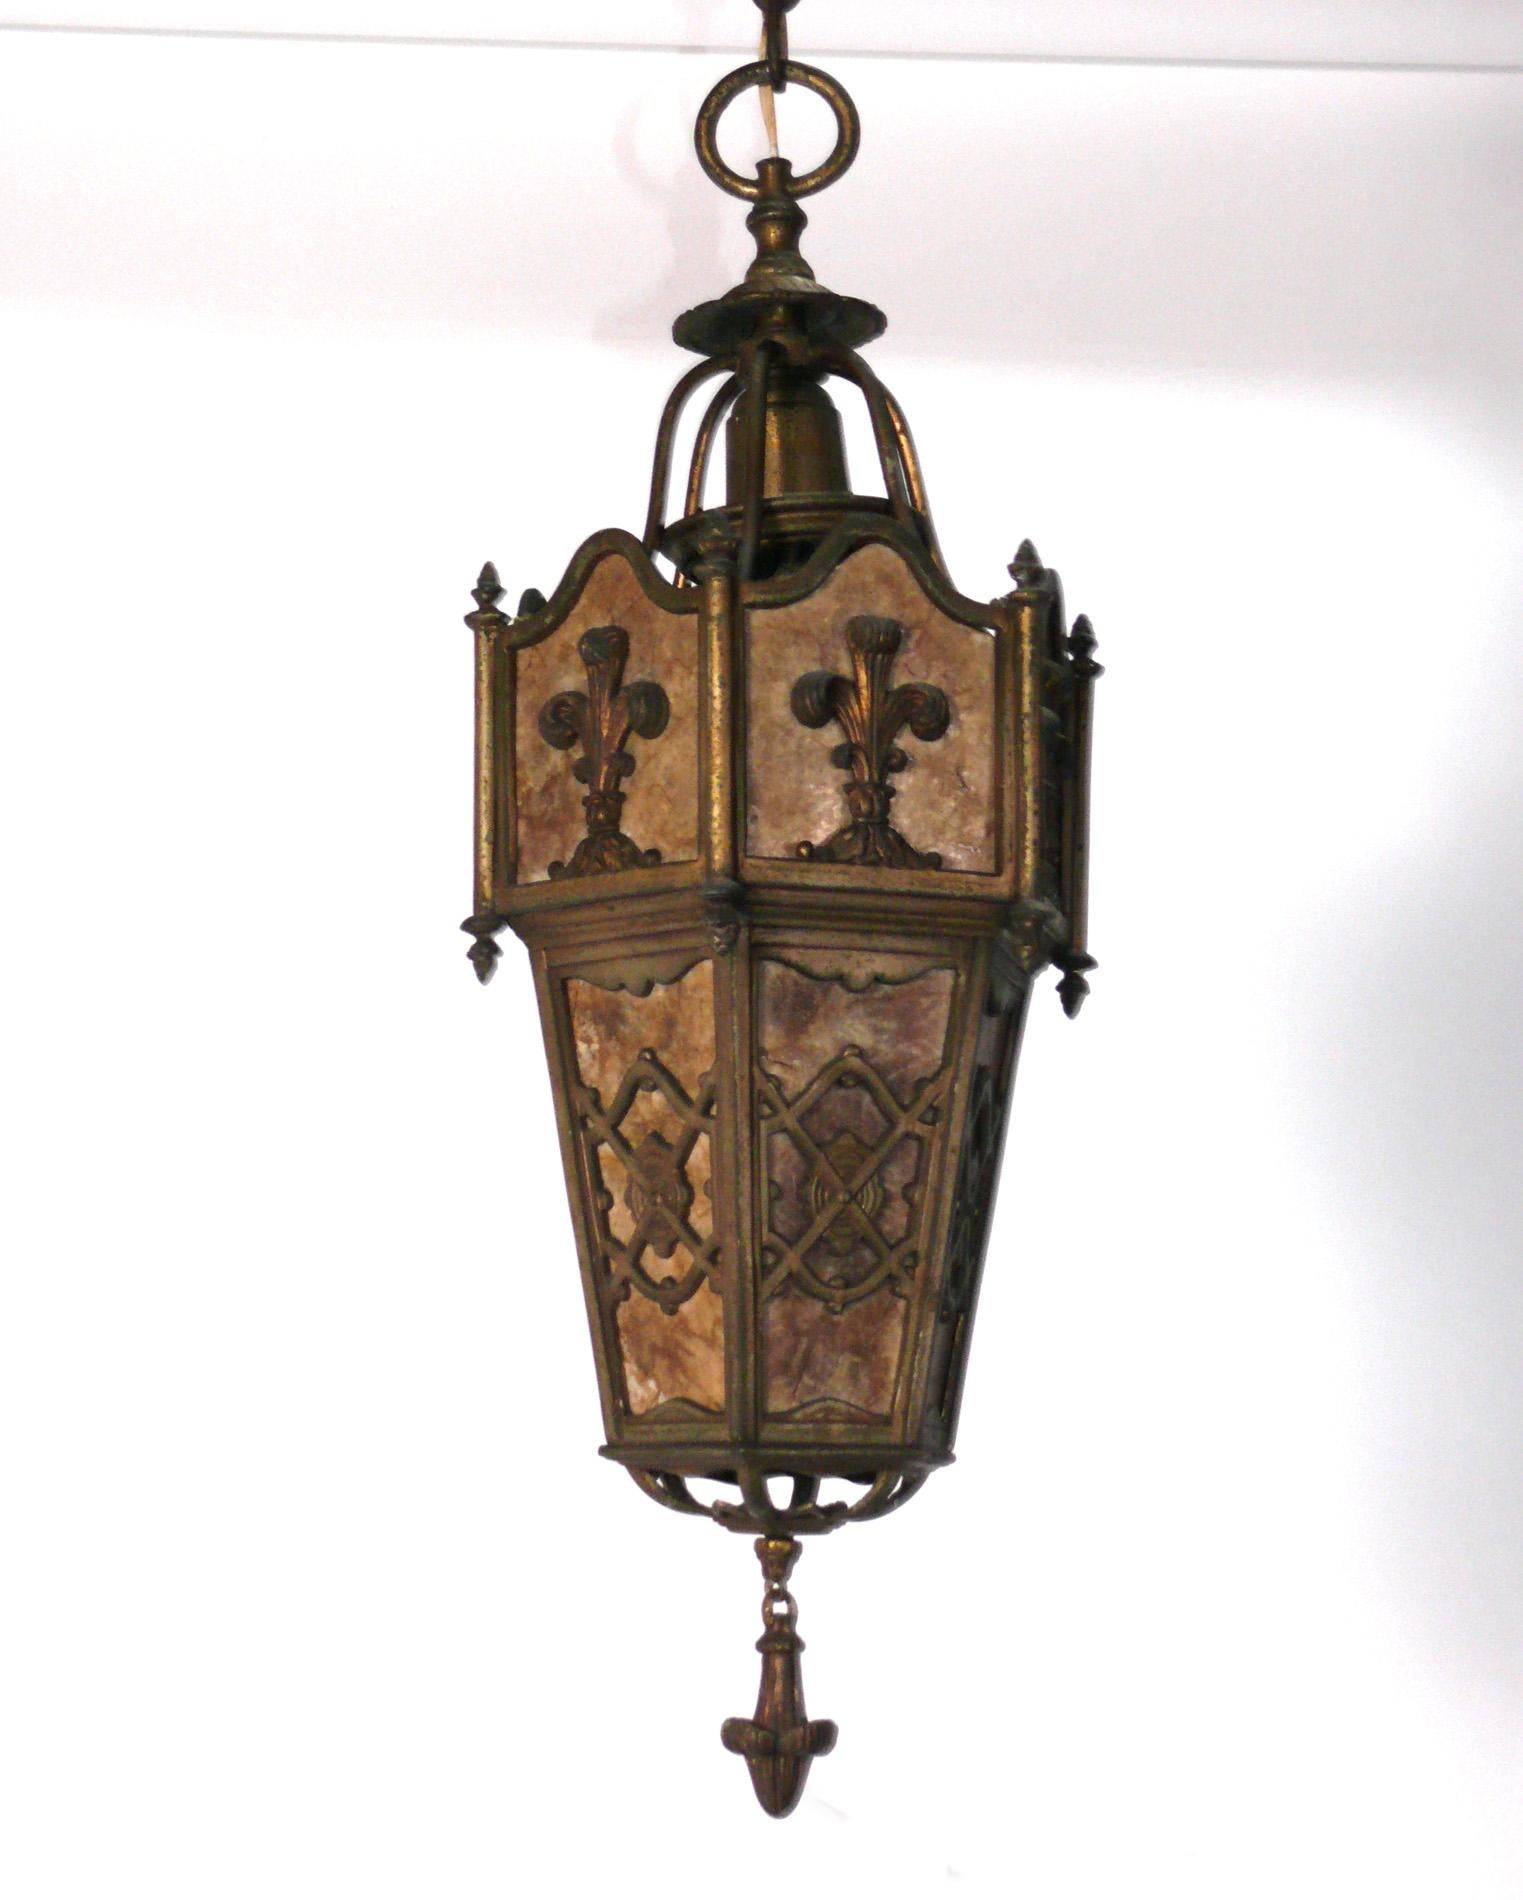 Bronze Finish Mica Pendant lantern or chandelier, probably English, circa 1930s. Would look great in the foyer or hallway of an Arts and Crafts or Spanish Revival home, as the mica gives off a warm glow. It has been rewired and is ready to mount.